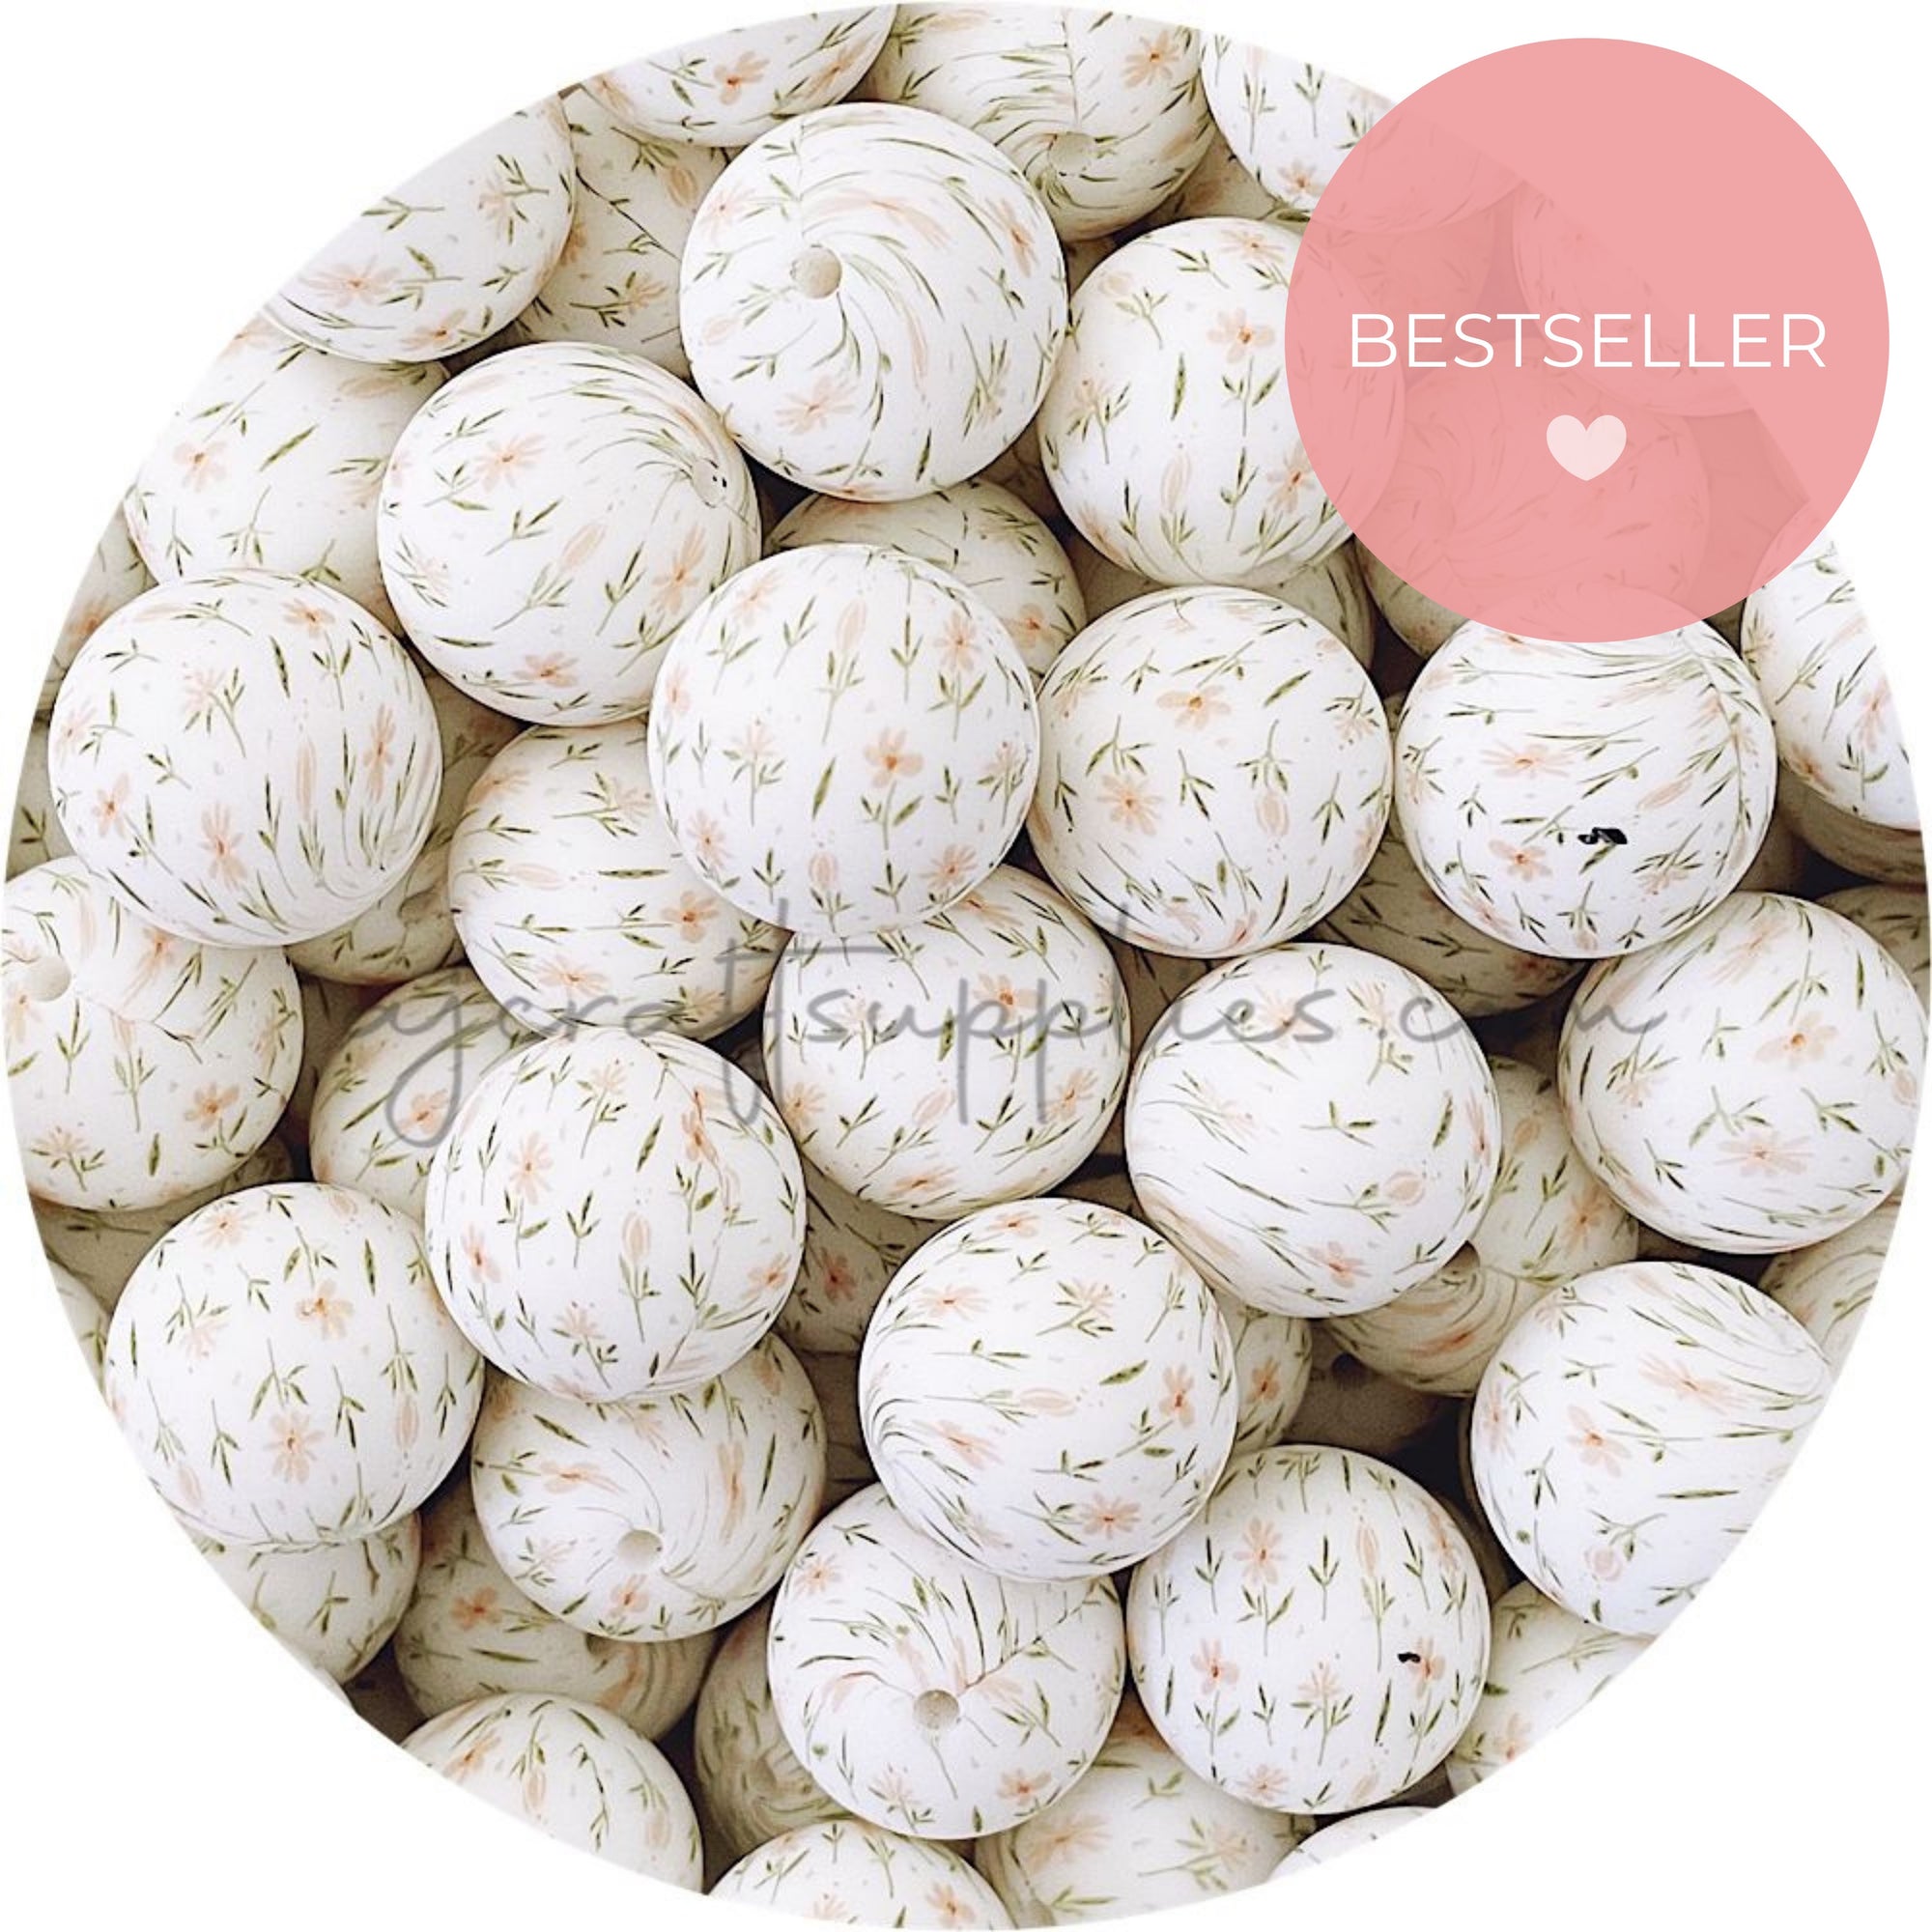 Daisy Print - 19mm round Silicone Beads - 5 Beads